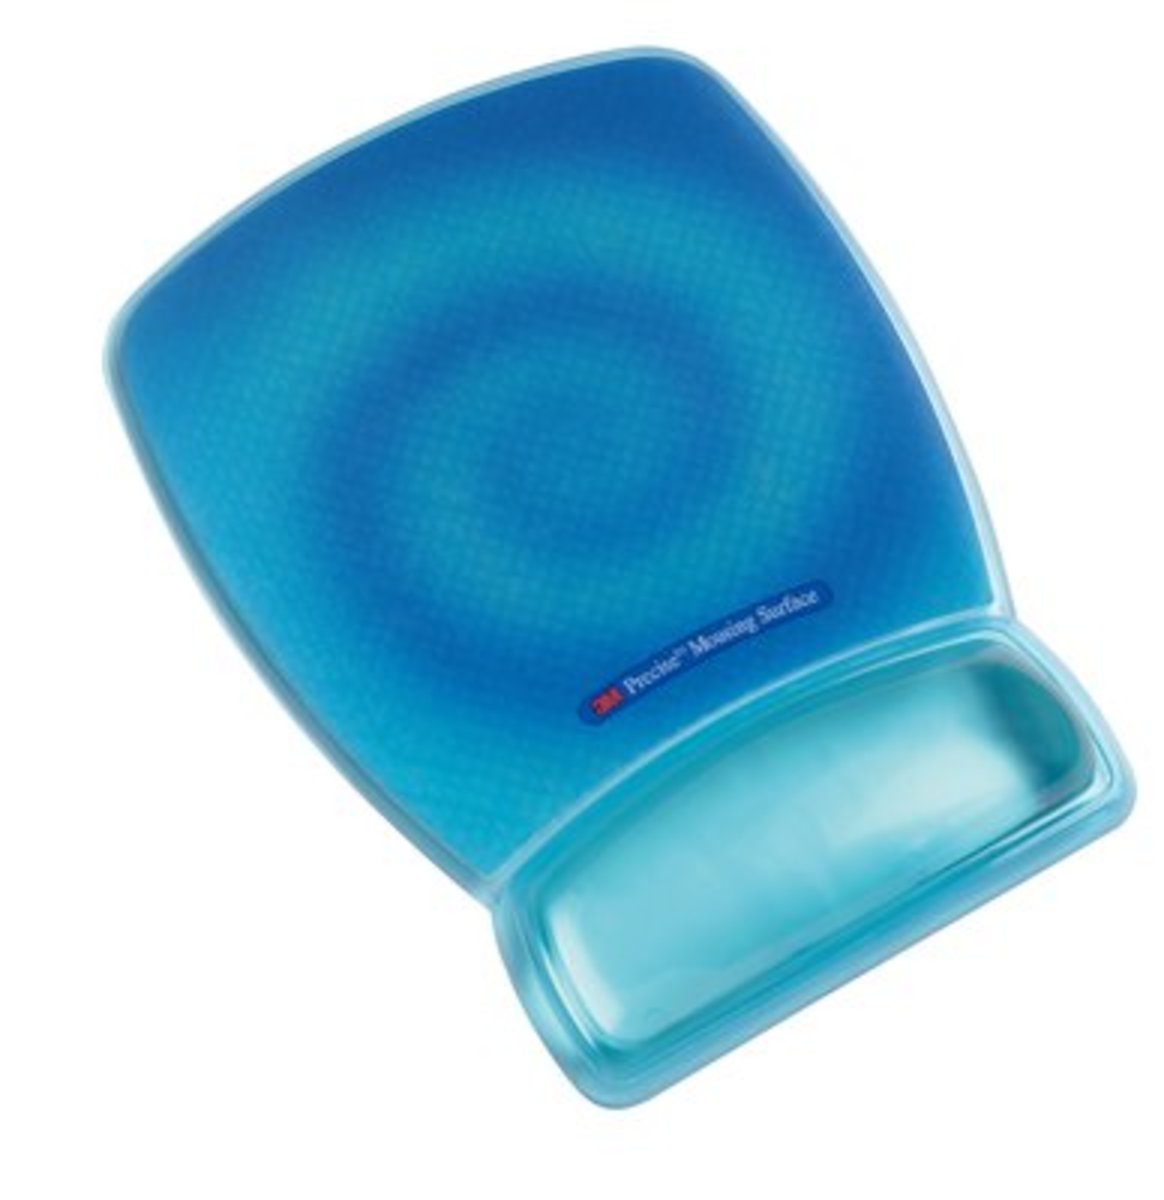 3M Precise Mouse Pad with Gel-filled Wrist Rest (Blue) #MWJ309bE